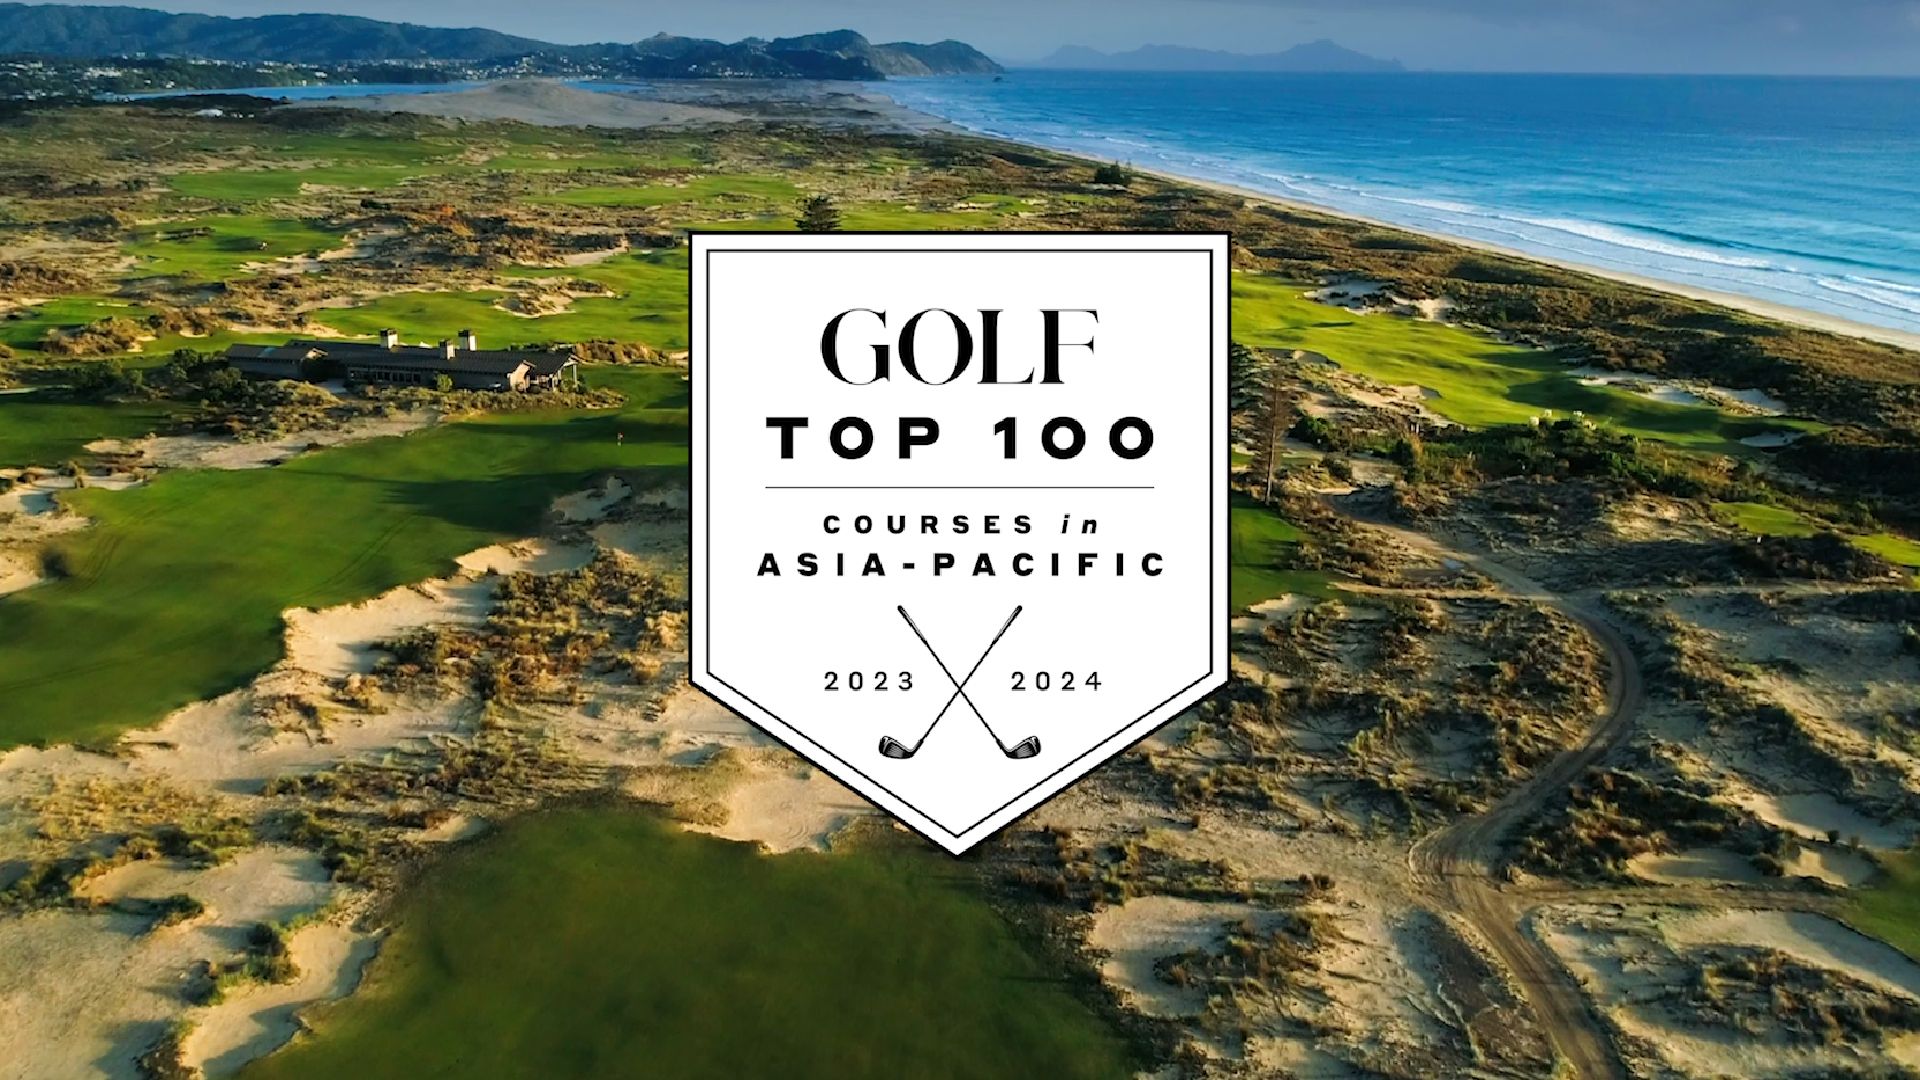 Introducing GOLF's first-ever Top 100 Courses in Asia-Pacific